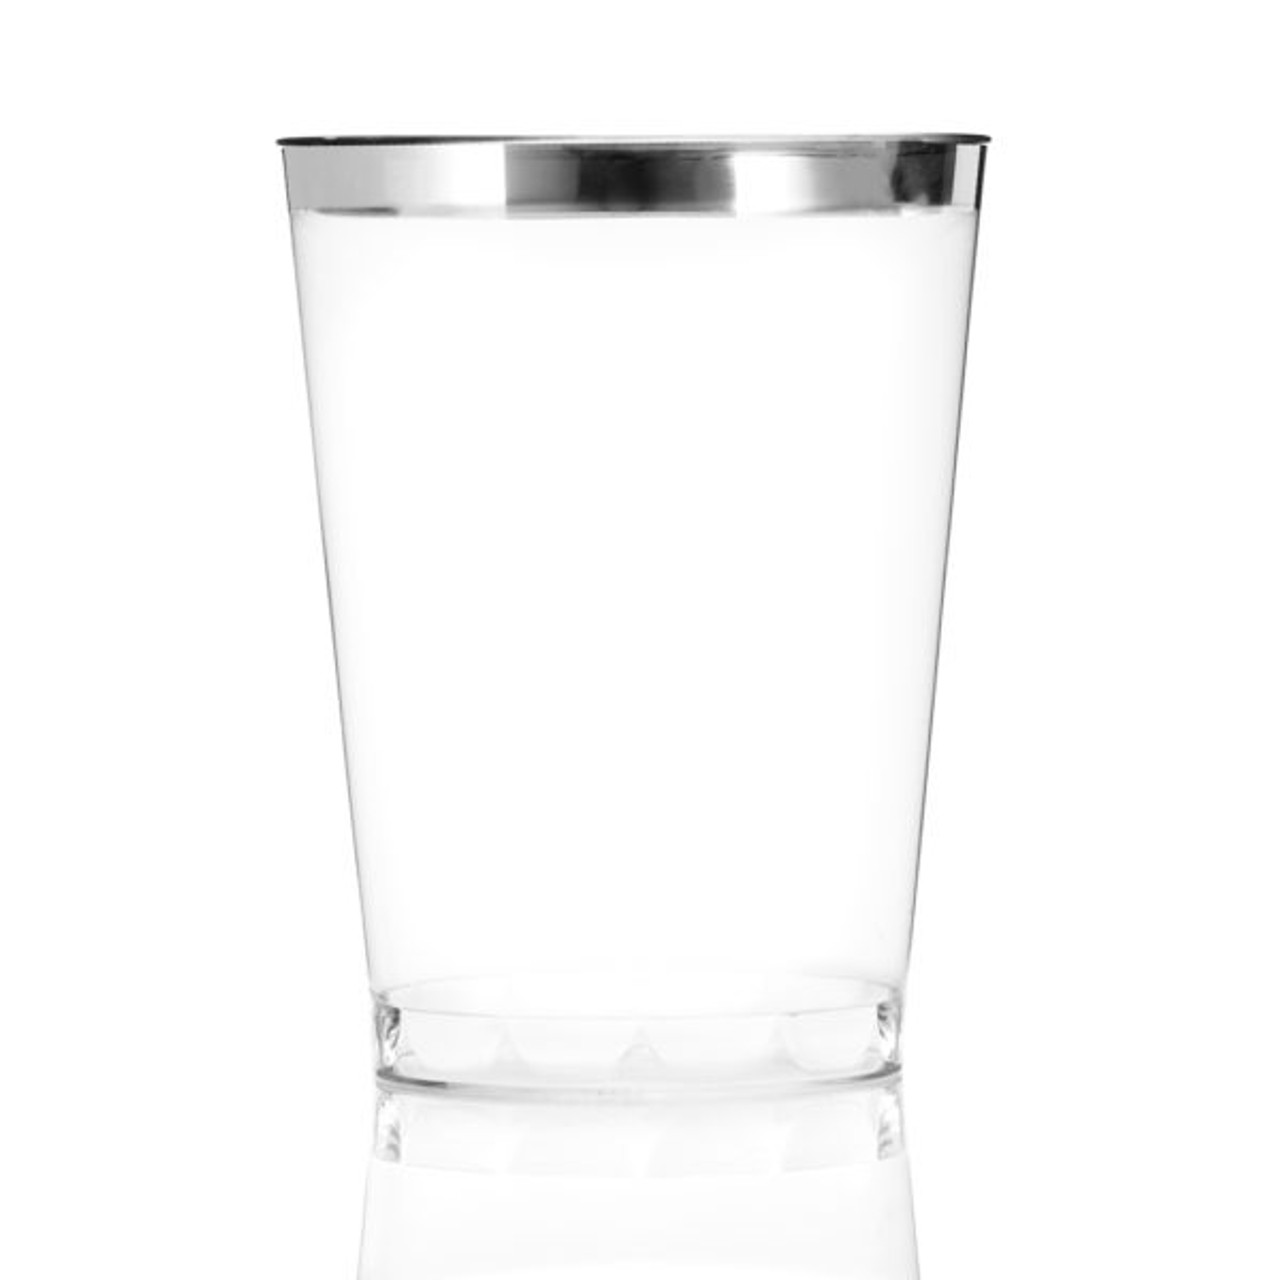 https://cdn11.bigcommerce.com/s-hgqmwywp99/images/stencil/1280x1280/products/48933/43724/10-oz-clear-plastic-cups-old-fashioned-tumblers-silver-rimmed-fancy-disposable-wedding-cups-for-elegant-party-20ct-1__66814.1675880293.jpg?c=1?imbypass=on